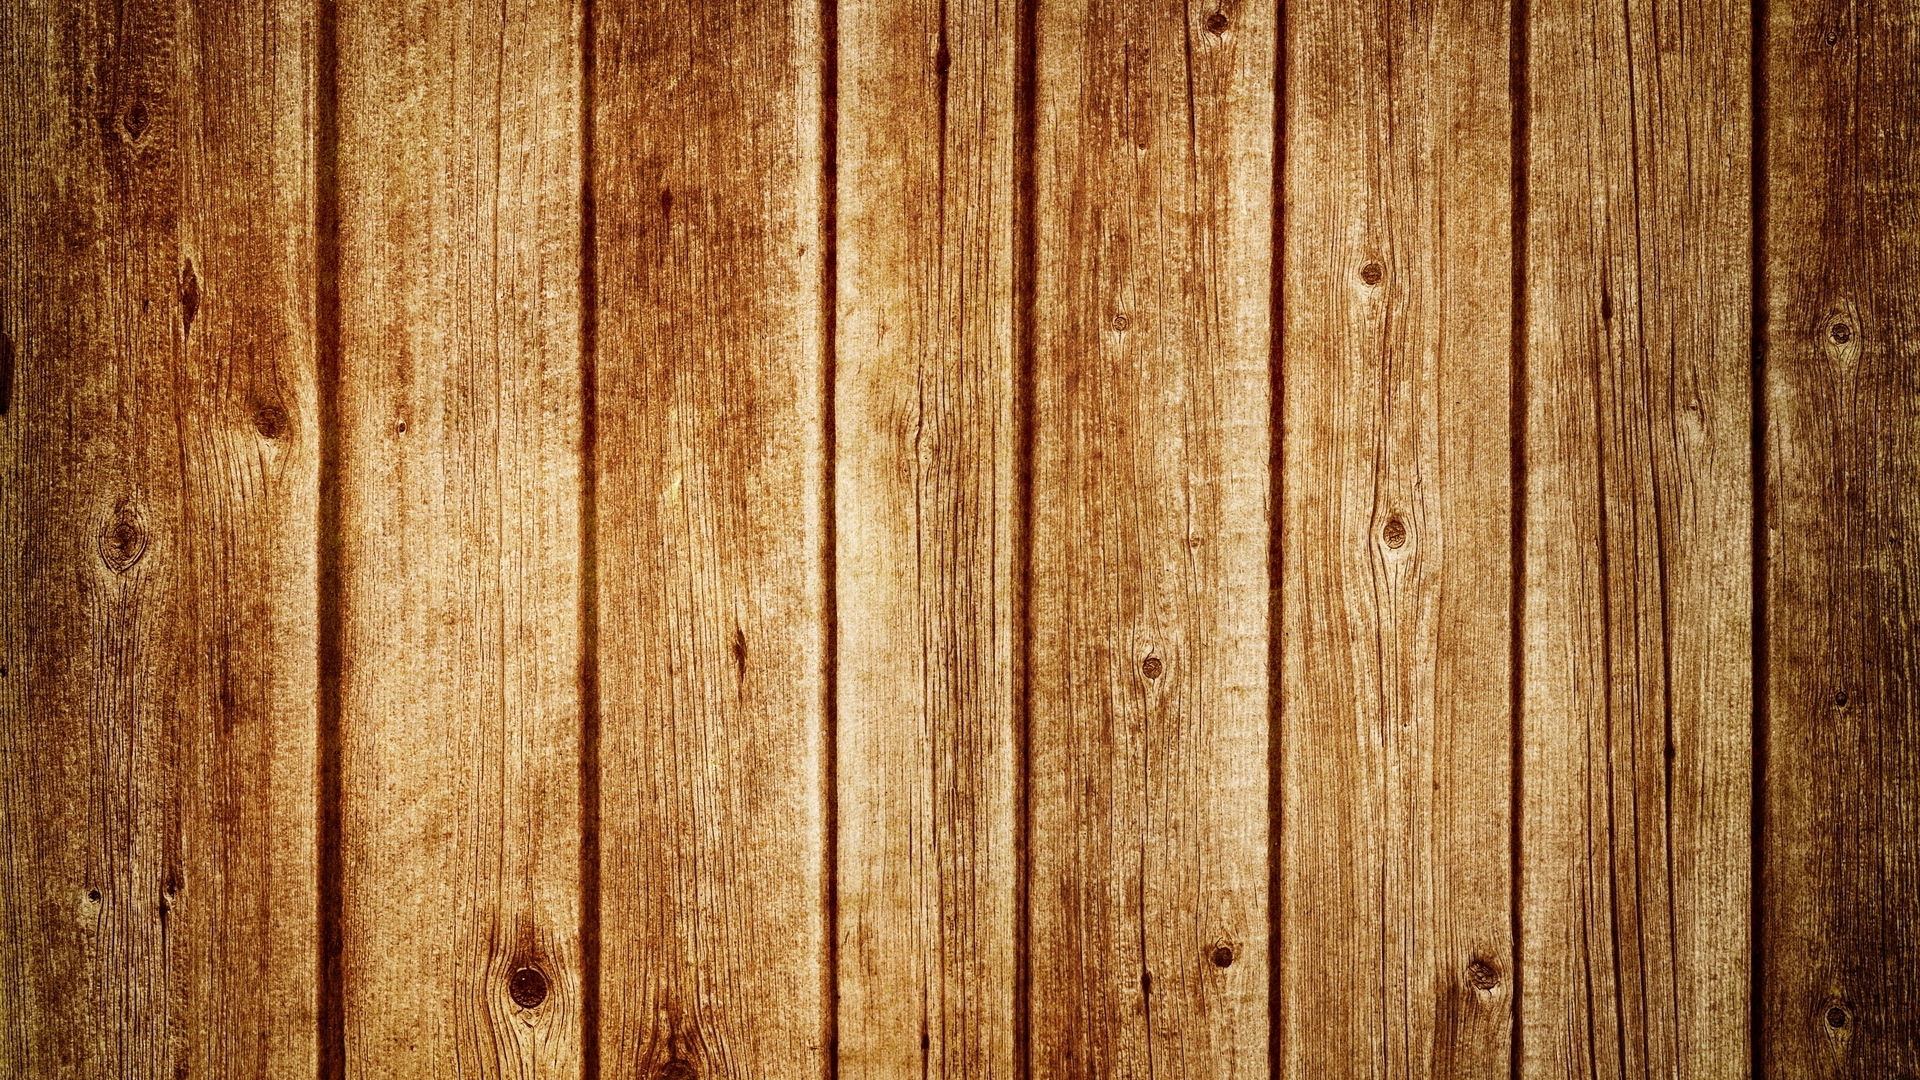 Wallpaper Boards Wooden Surface Background